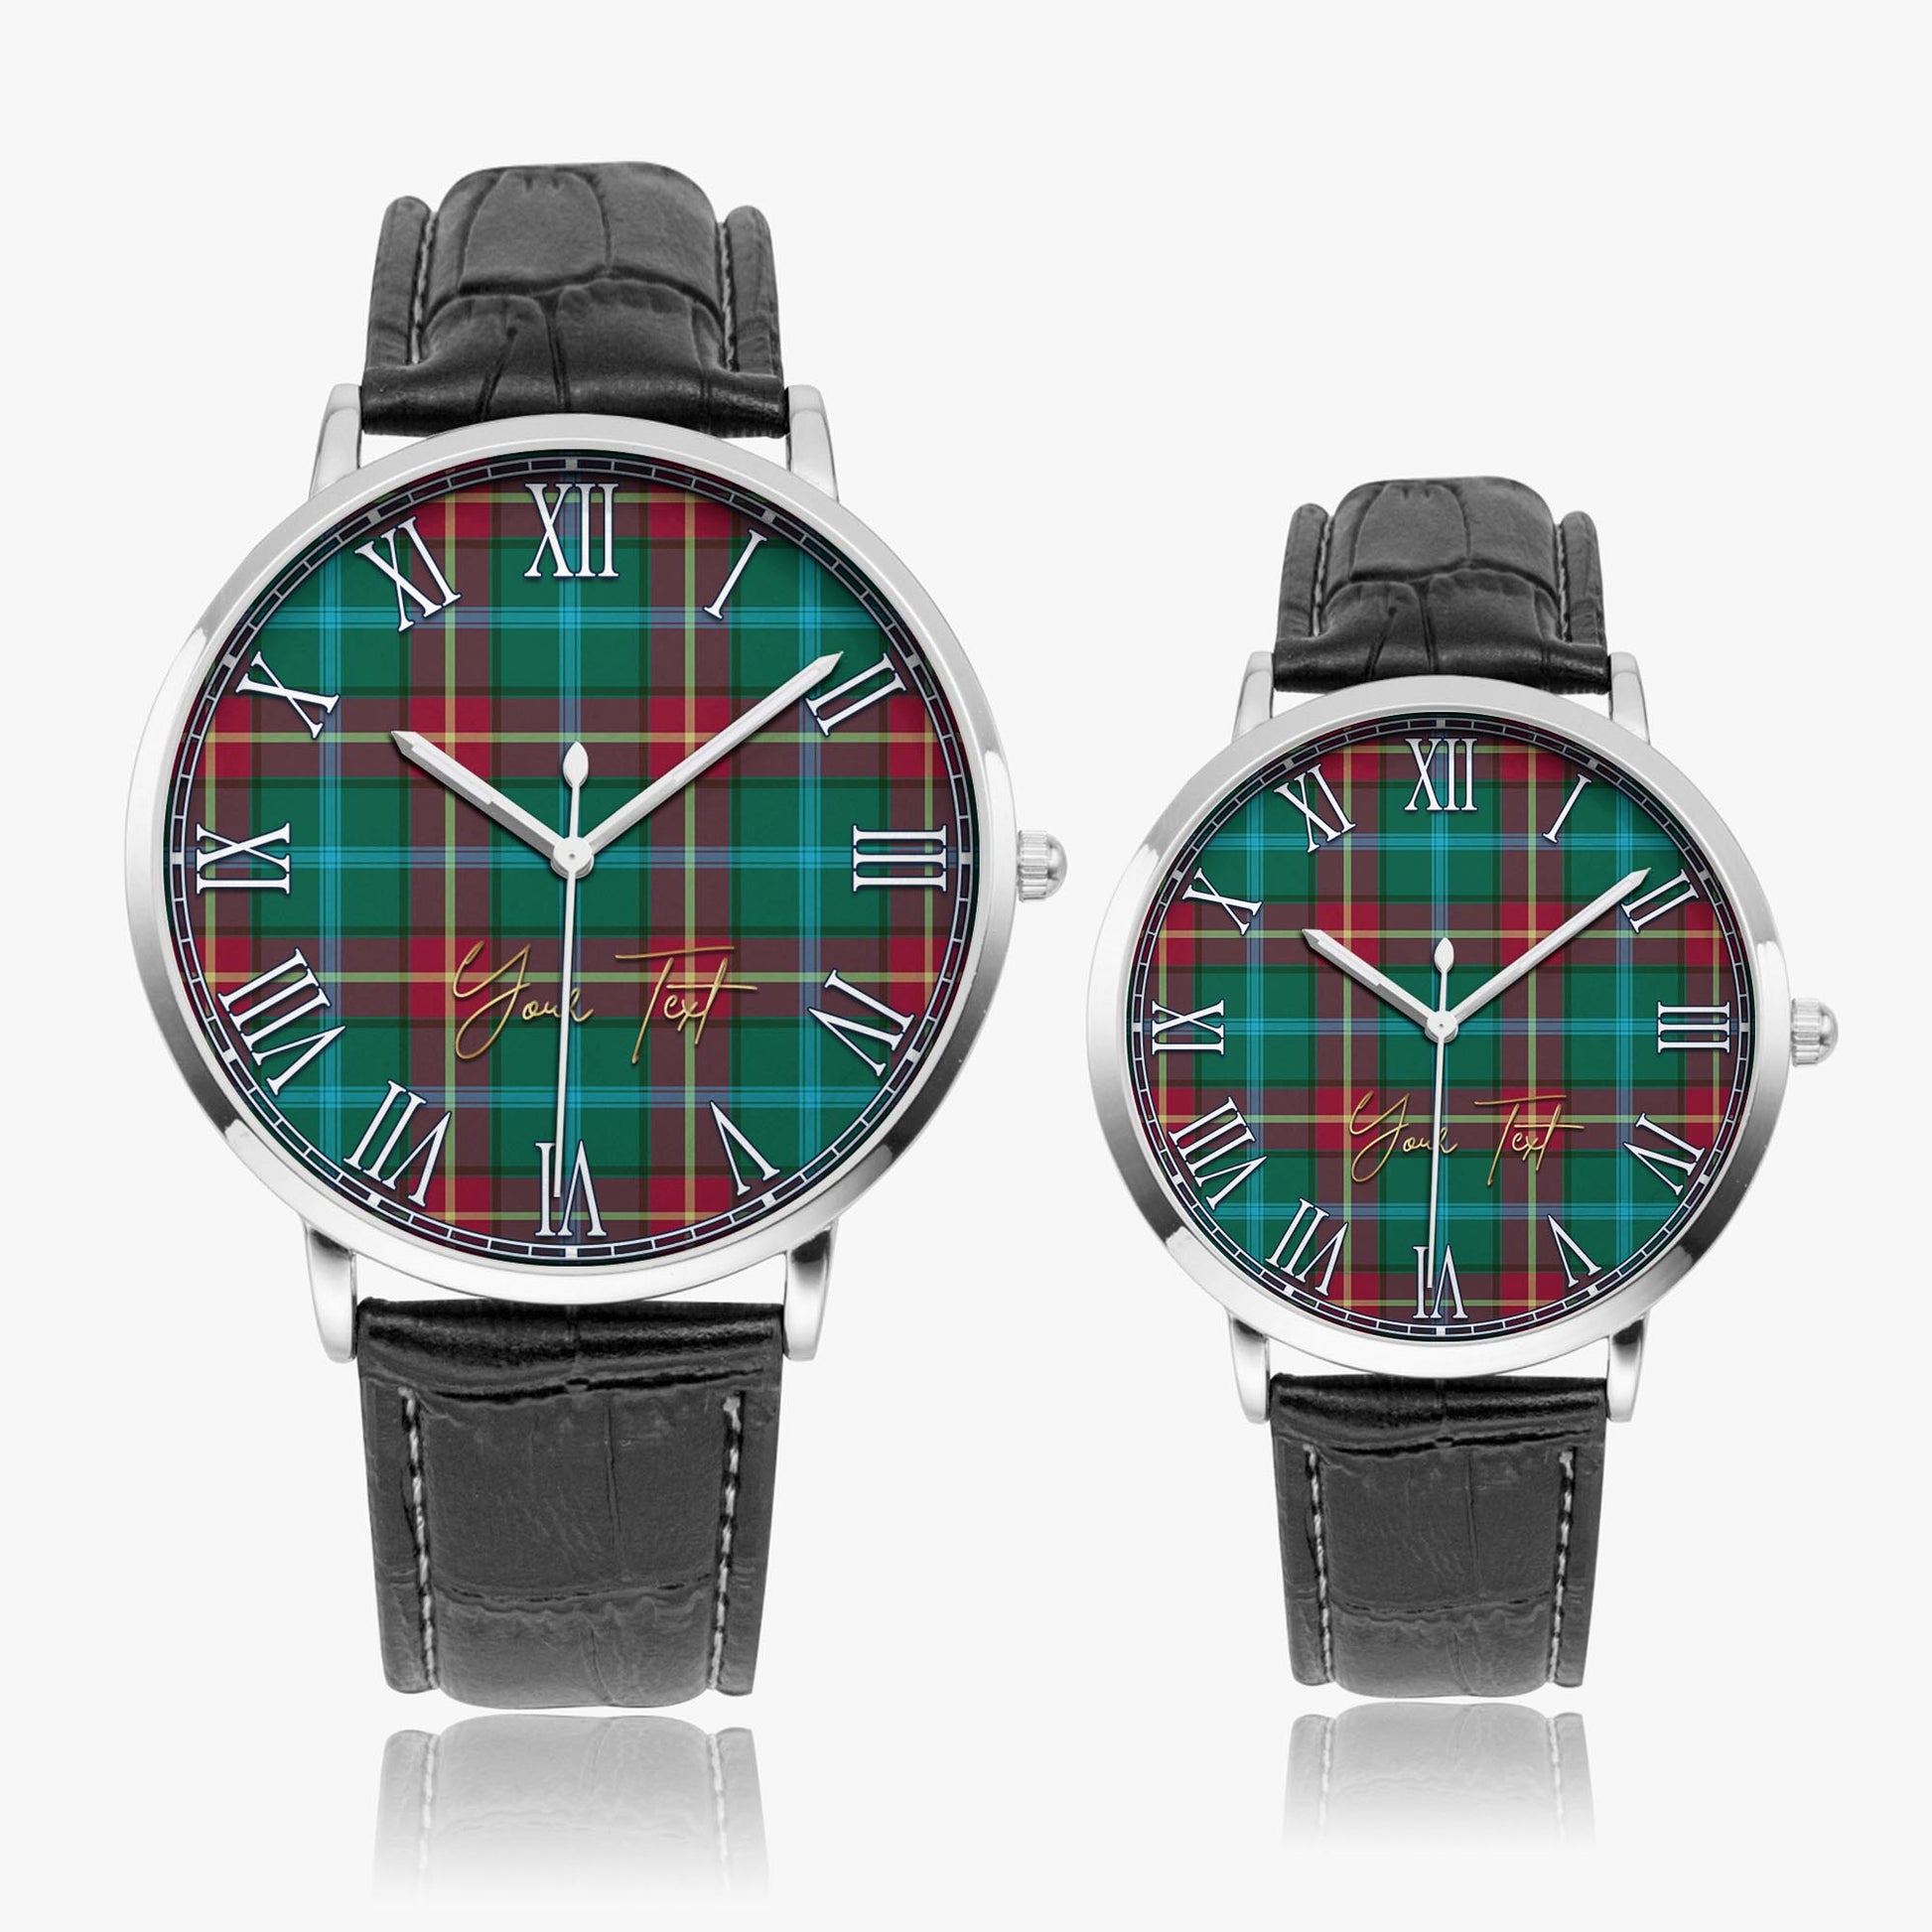 Manitoba Province Canada Tartan Personalized Your Text Leather Trap Quartz Watch Ultra Thin Silver Case With Black Leather Strap - Tartanvibesclothing